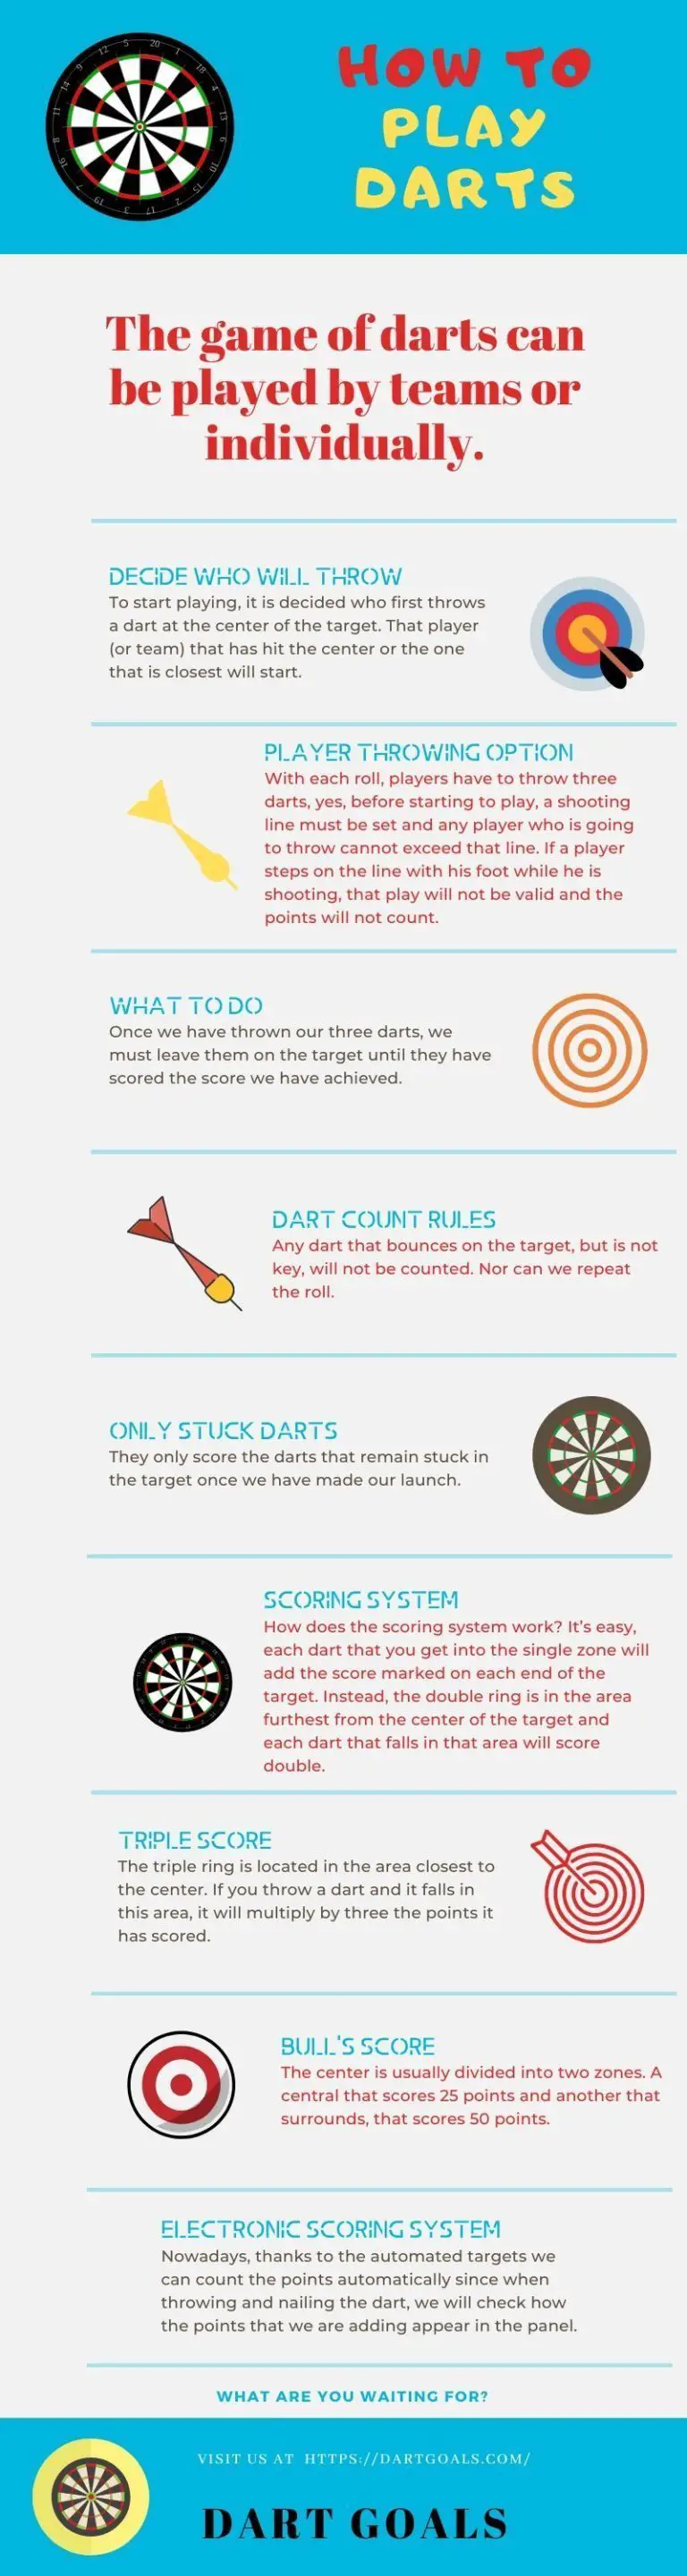 how-to-play-darts-Info-graphic